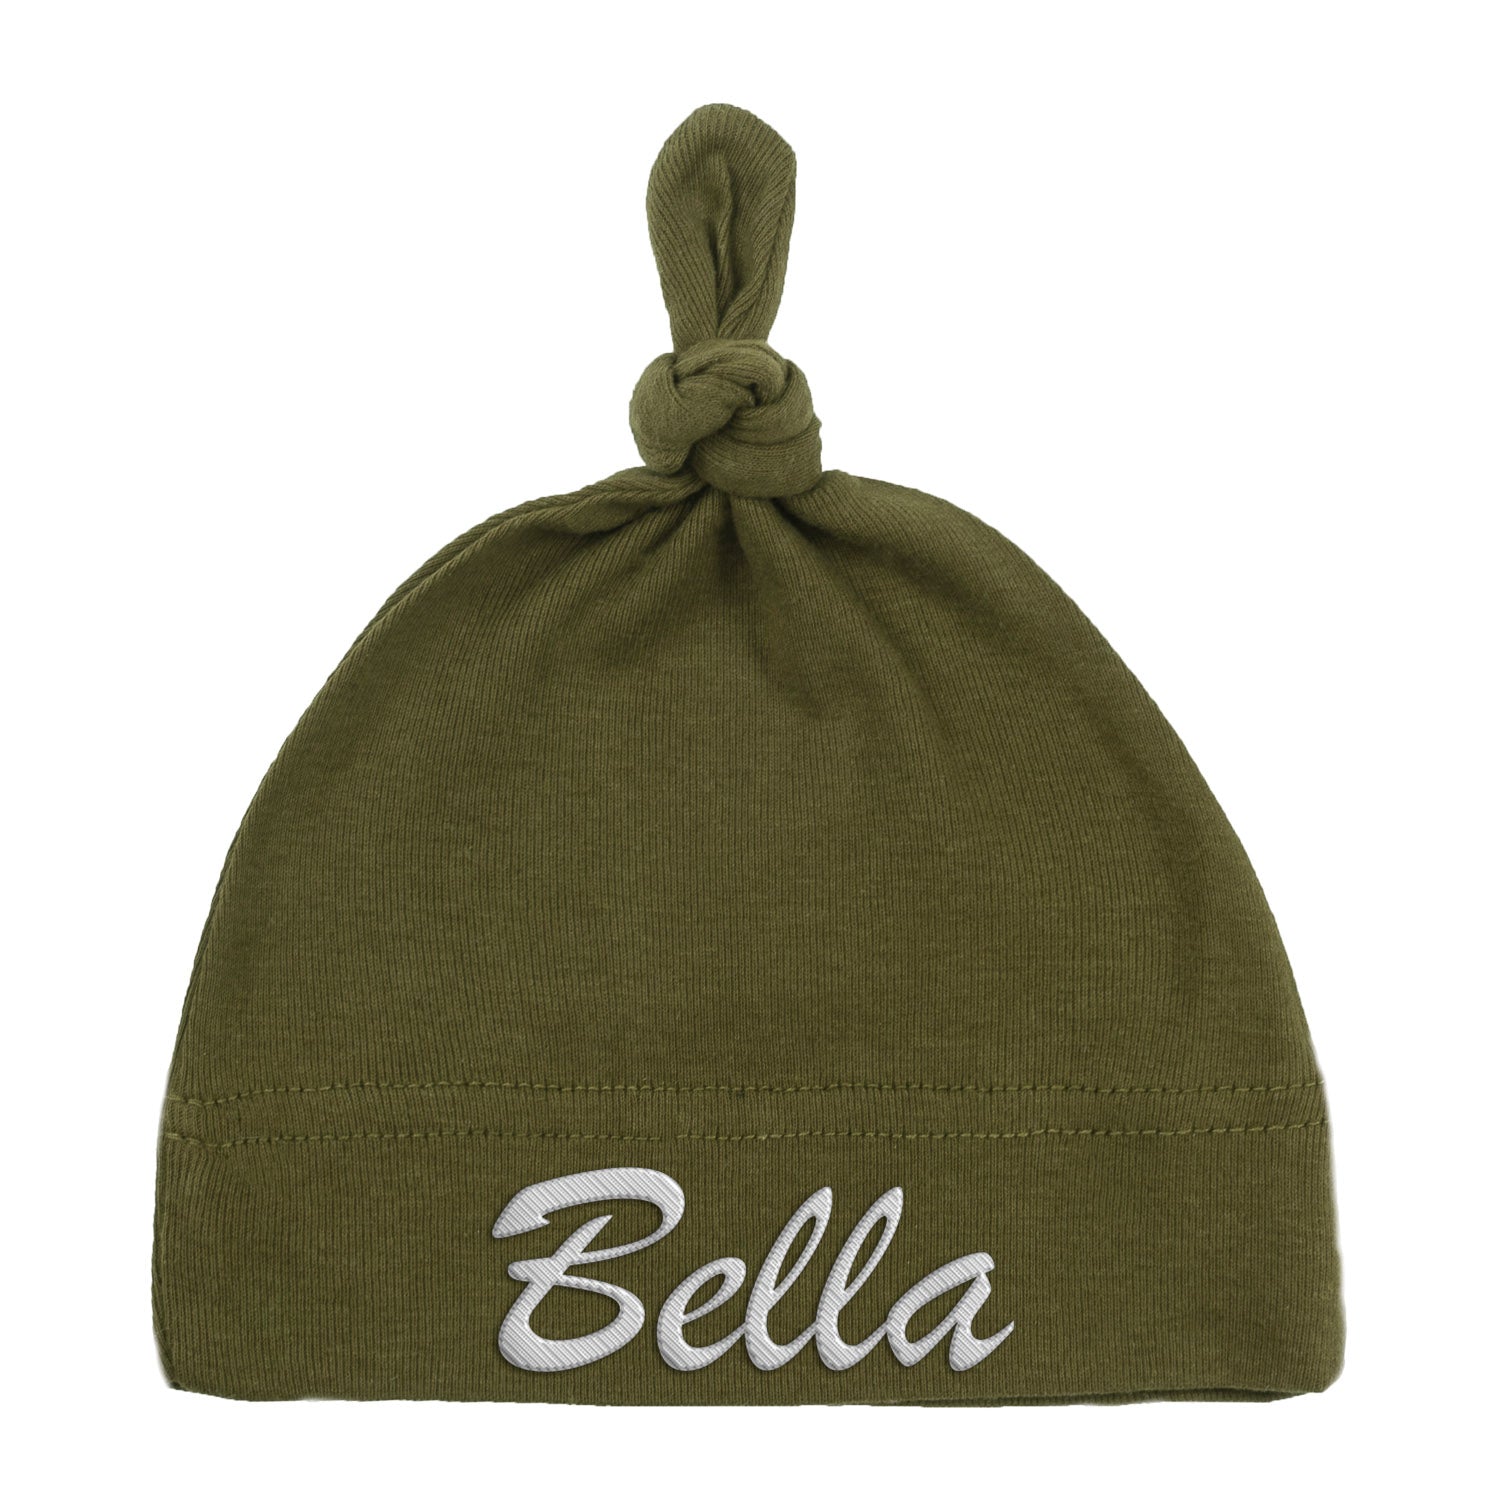 Embroidered Text Custom Name Baby Hat w/ Adjustable Top Knot - Mato & Hash